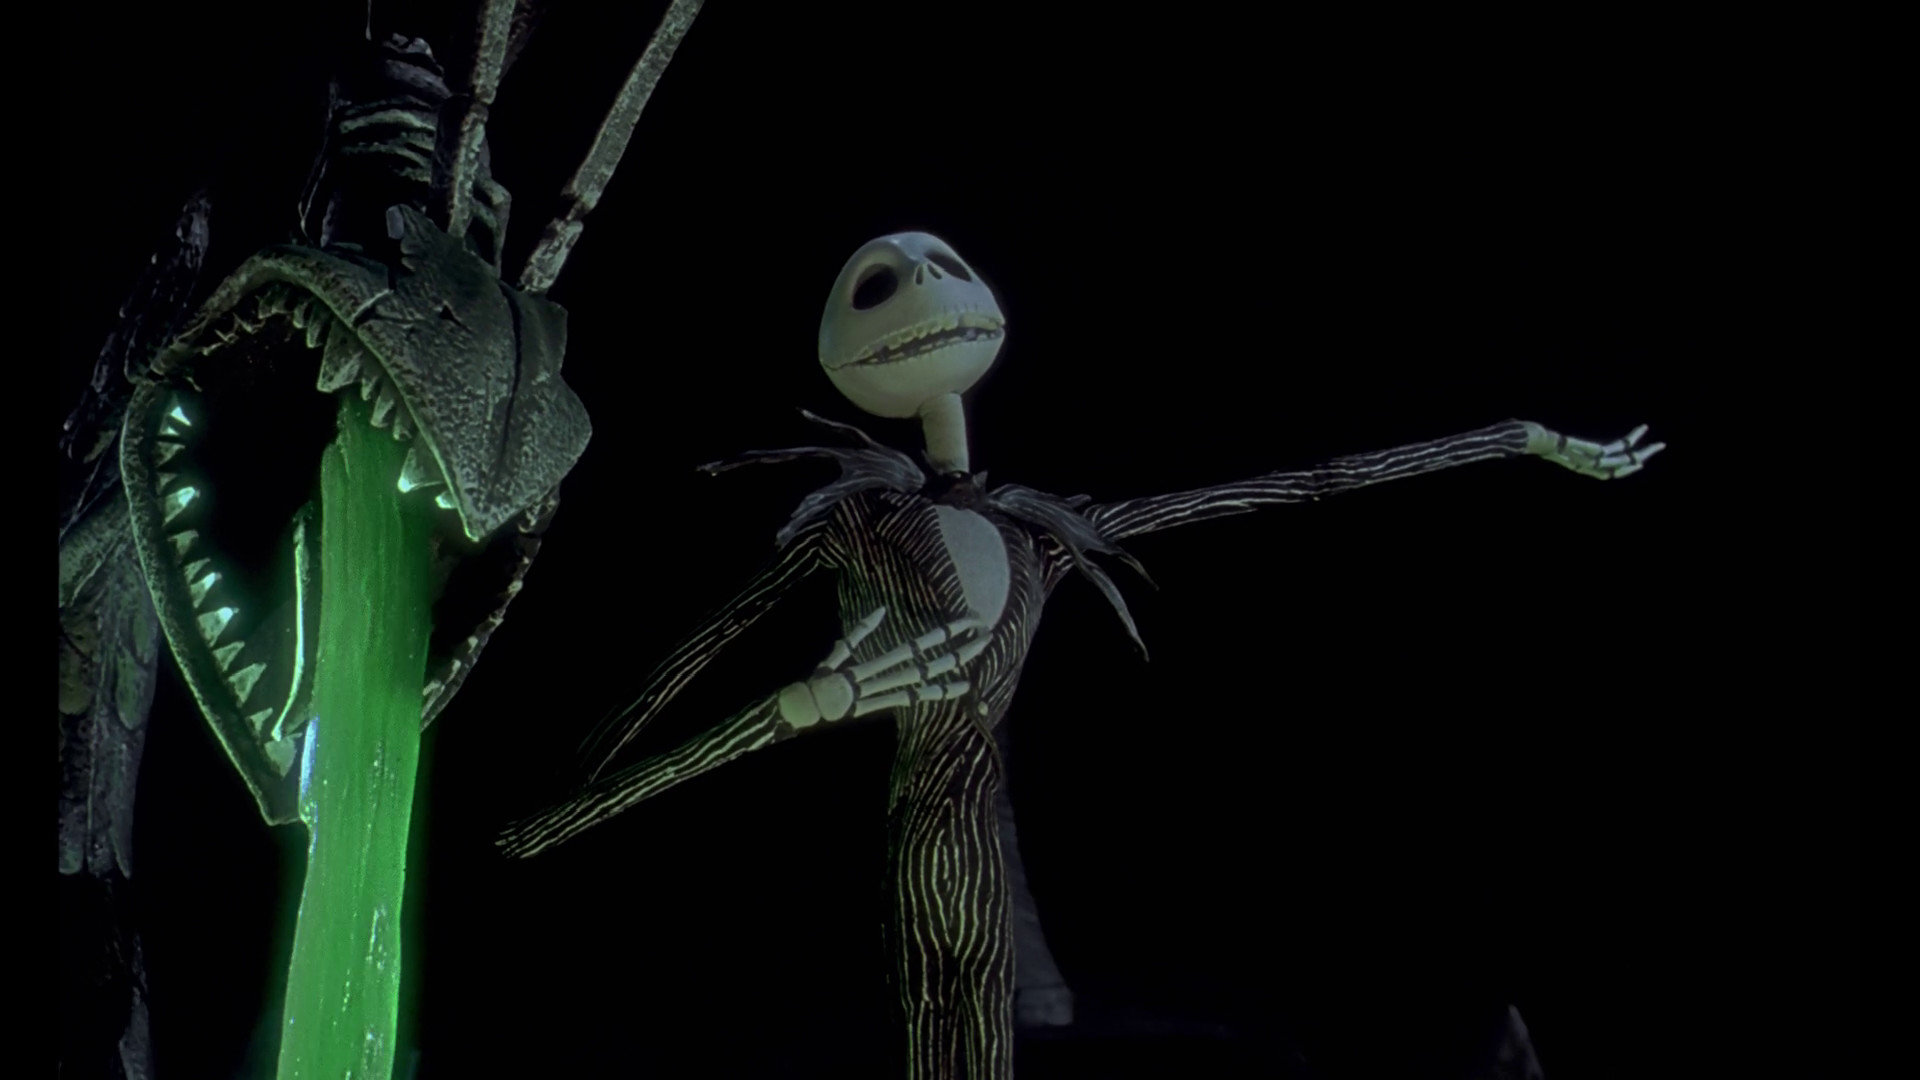 Download Hd 1080p The Nightmare Before Christmas Pc - Nightmare Before Christmas Jack Fountain - HD Wallpaper 